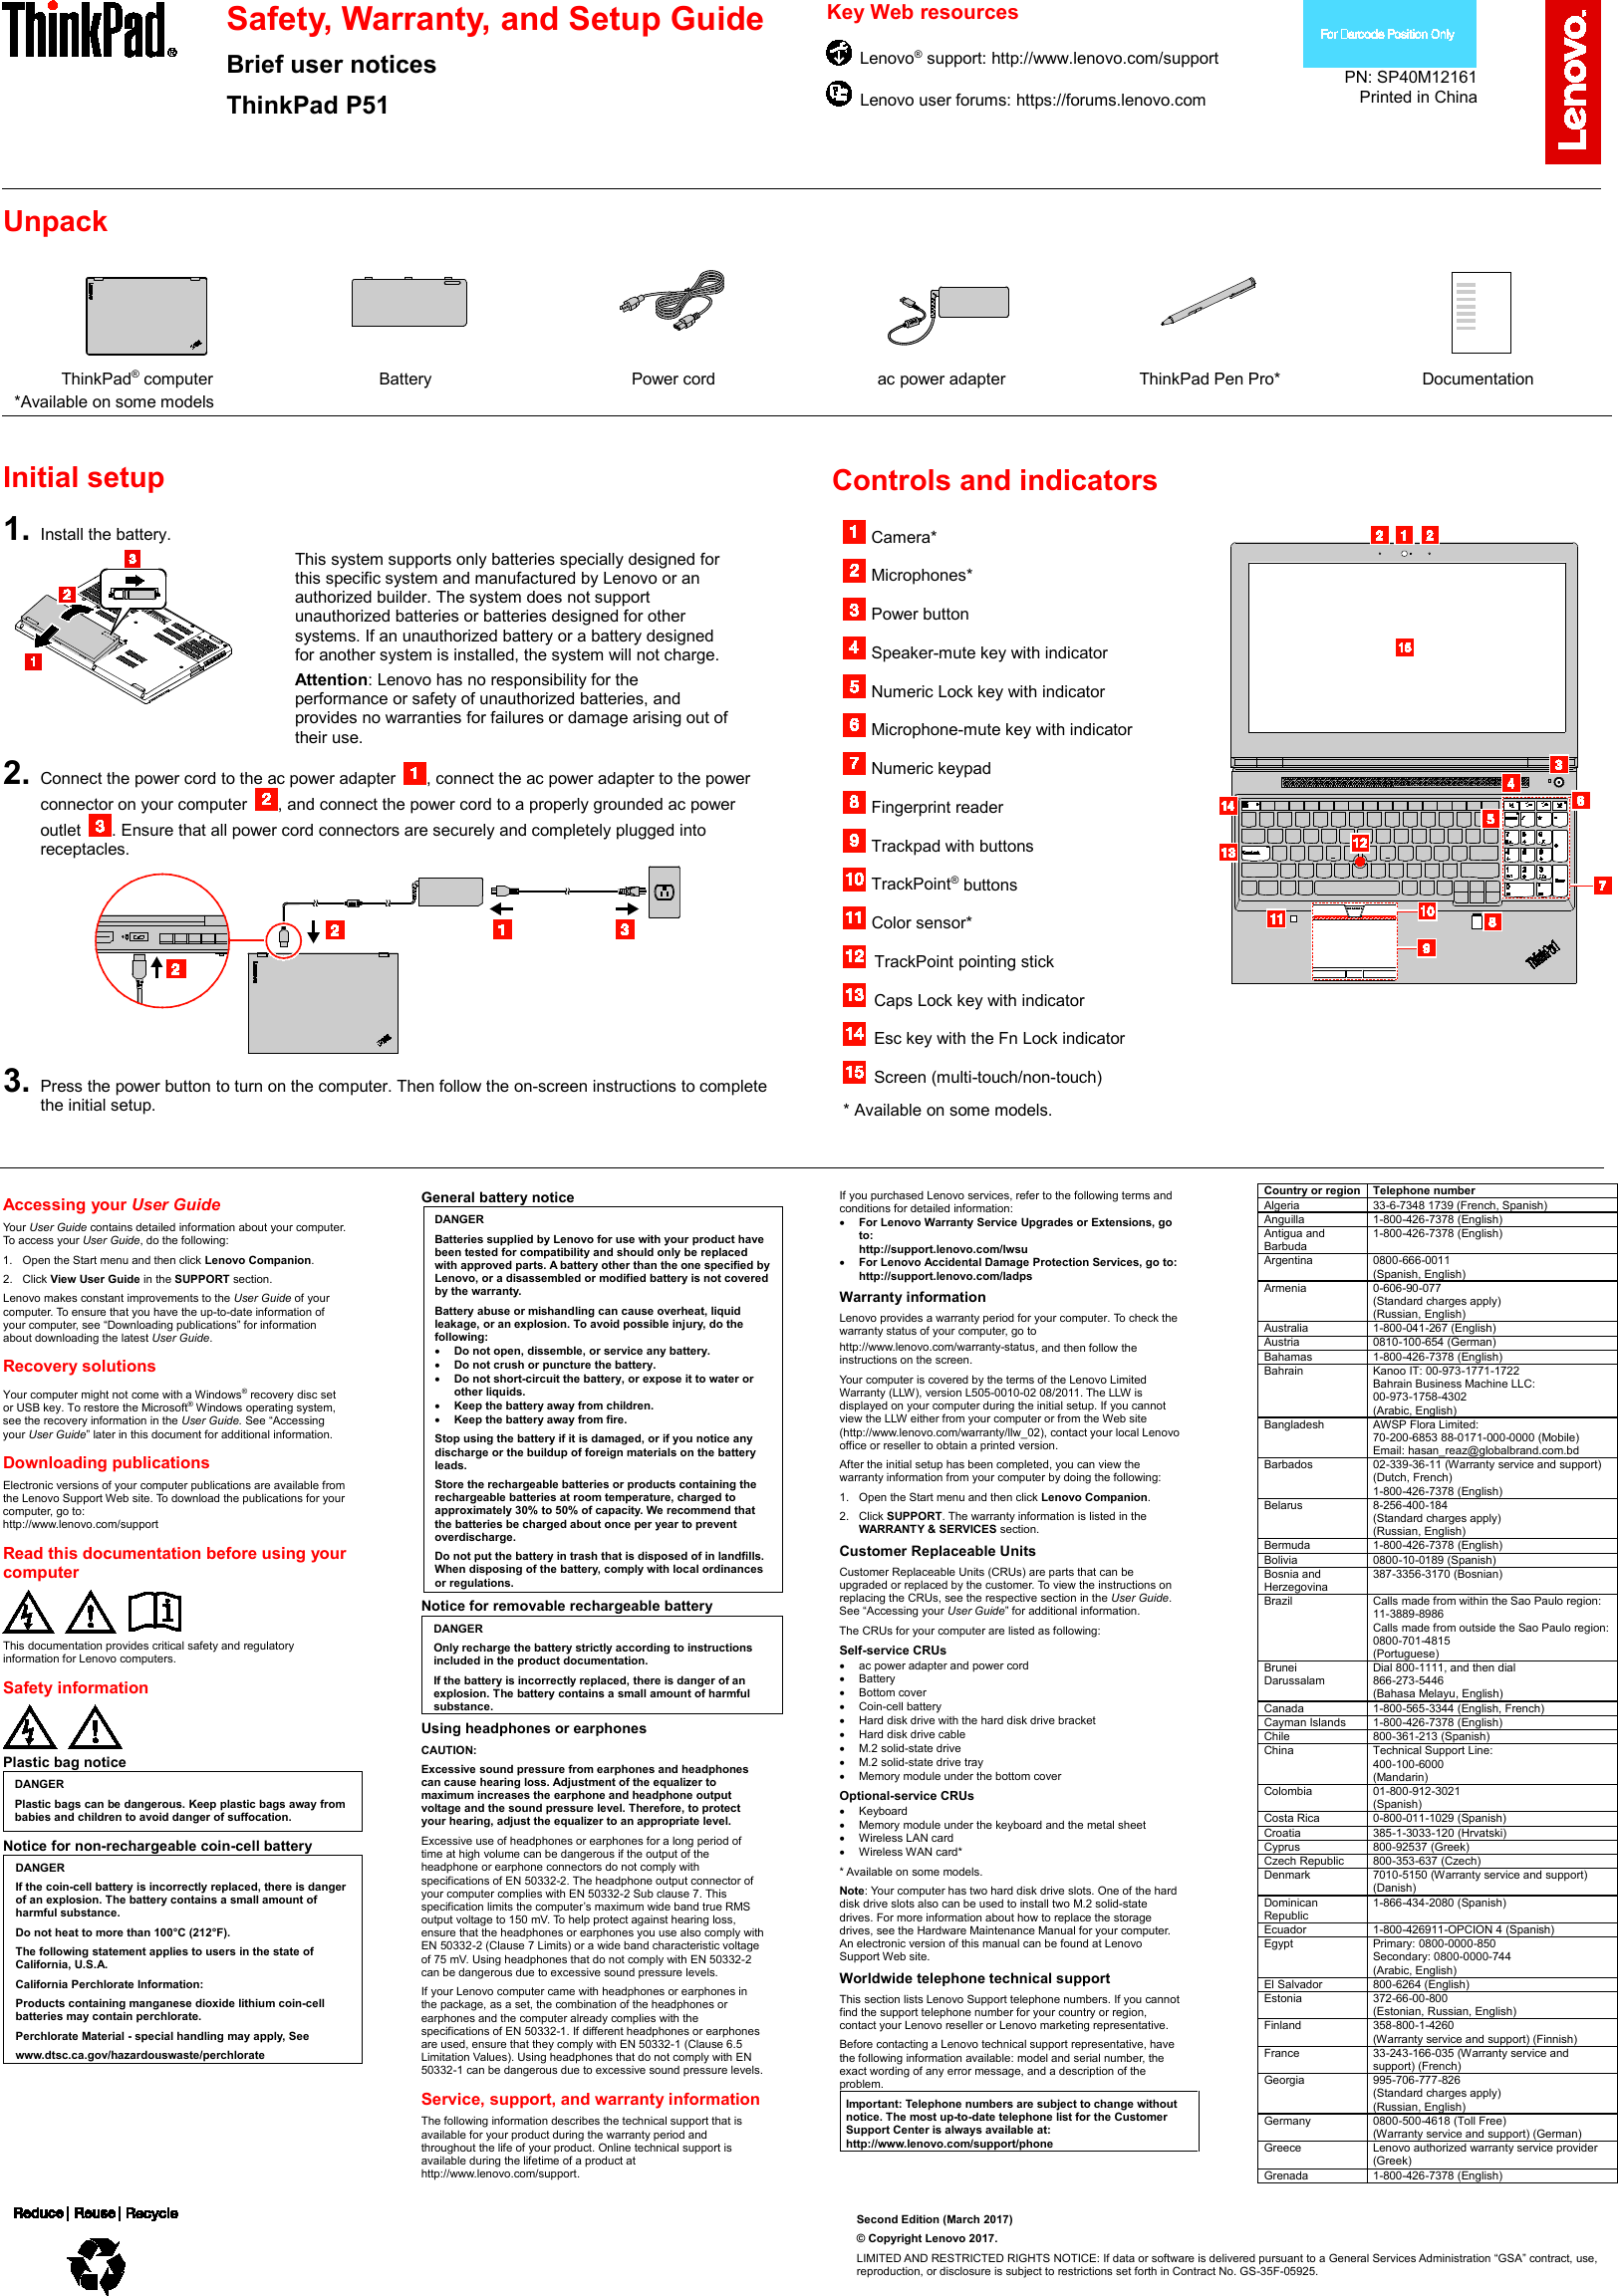 Page 1 of 2 - Lenovo P51 Swsg En Sp40M12161 User Manual (English) Safety, Warranty And Setup Guide - Think Pad (20HH, 20HJ) (Type 20HH, Laptop (Thinkpad) Type 20HJ